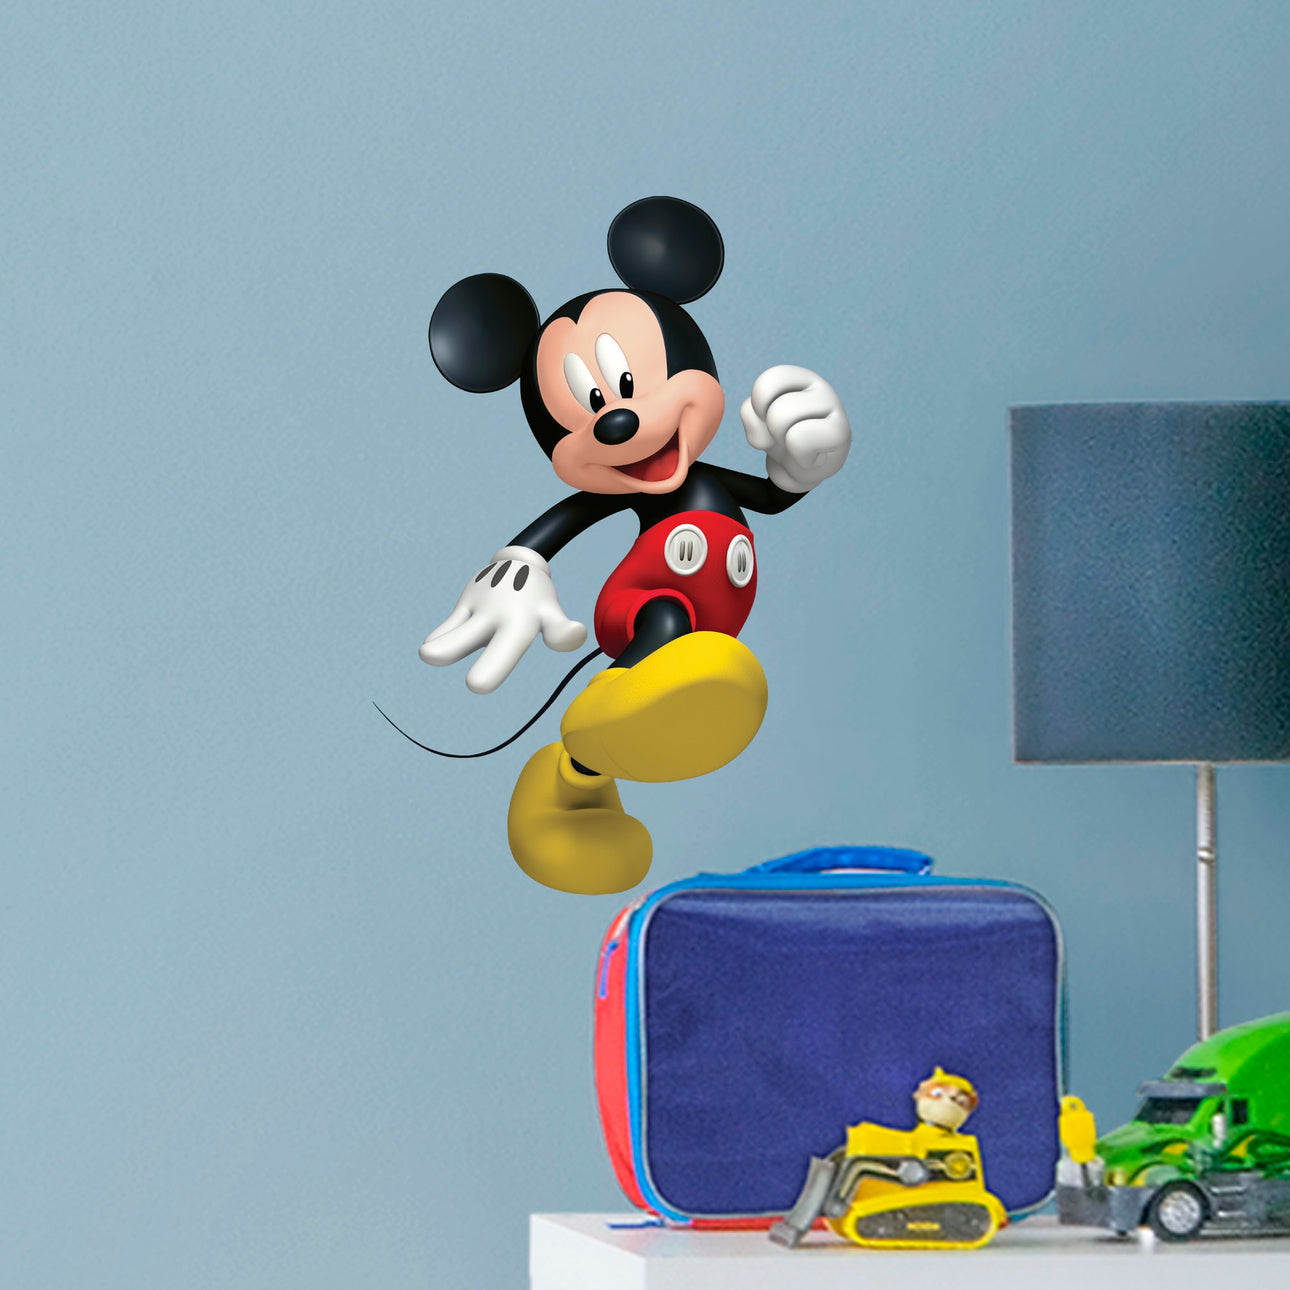 Mickey Mouse Officially Licensed Disney Removable Wall Decal 